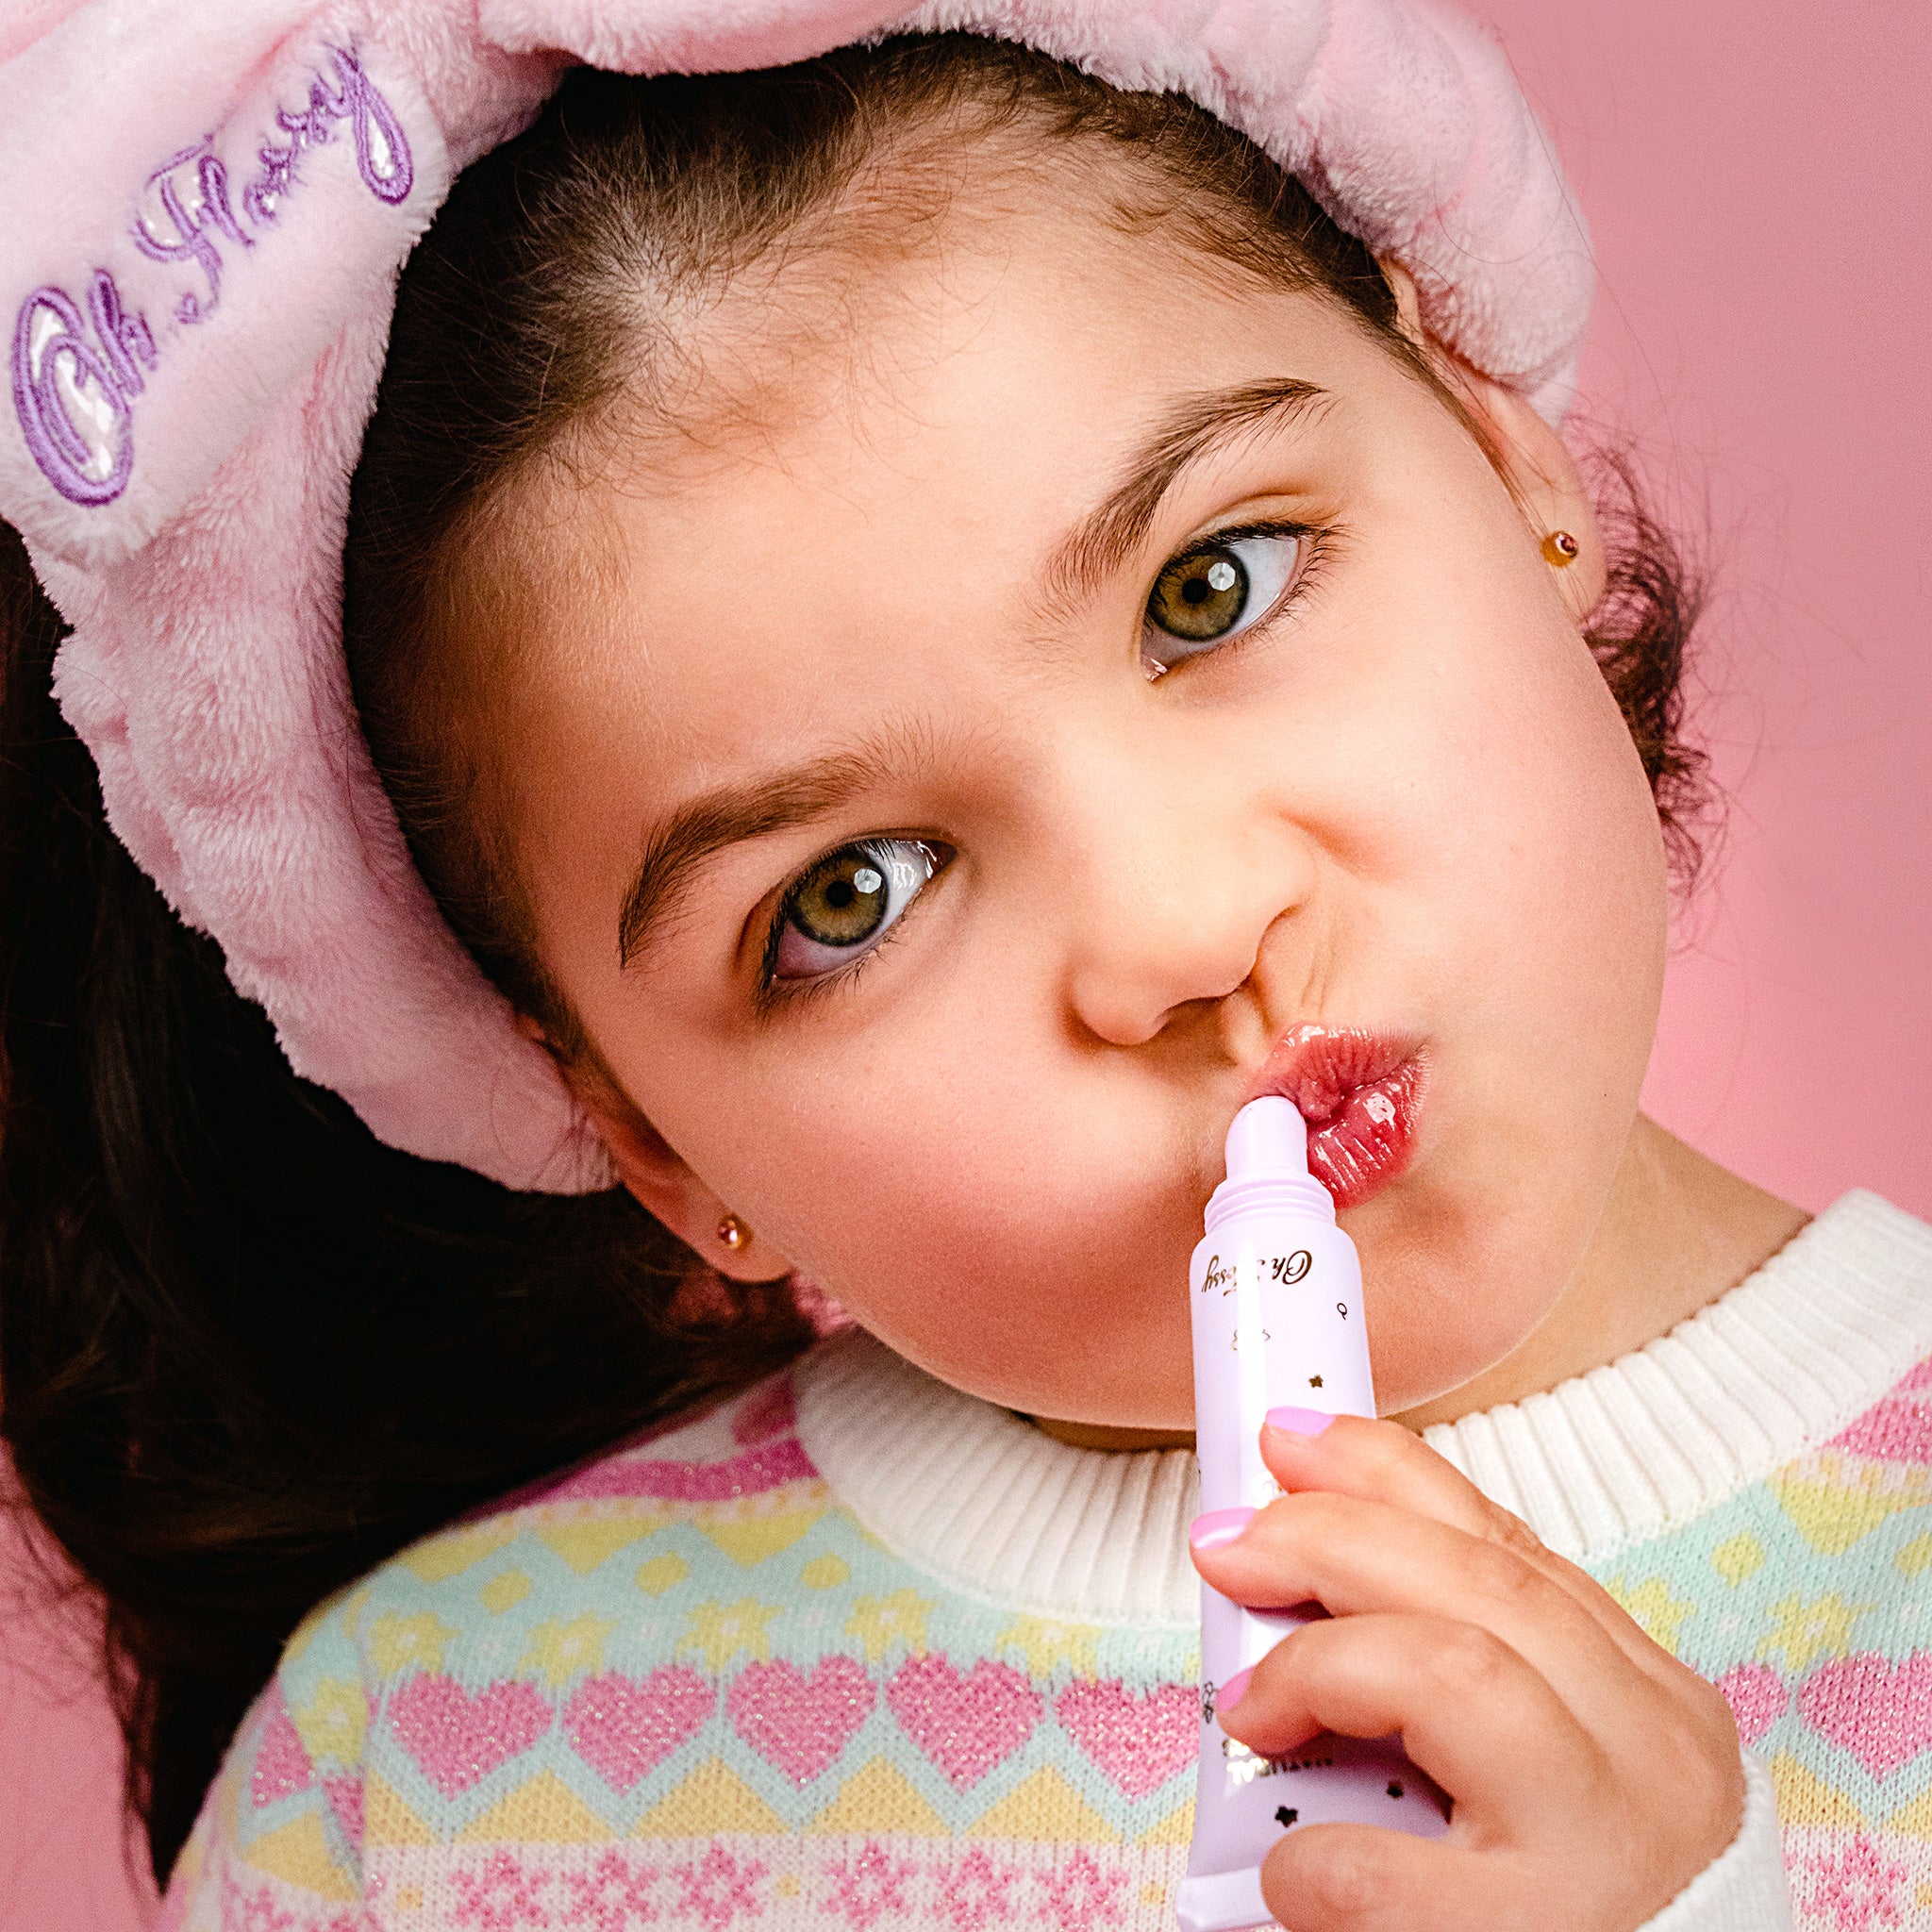     Oh-Flossy-Kids-Natural-Makeup-Lip-gloss-duo-on-hands